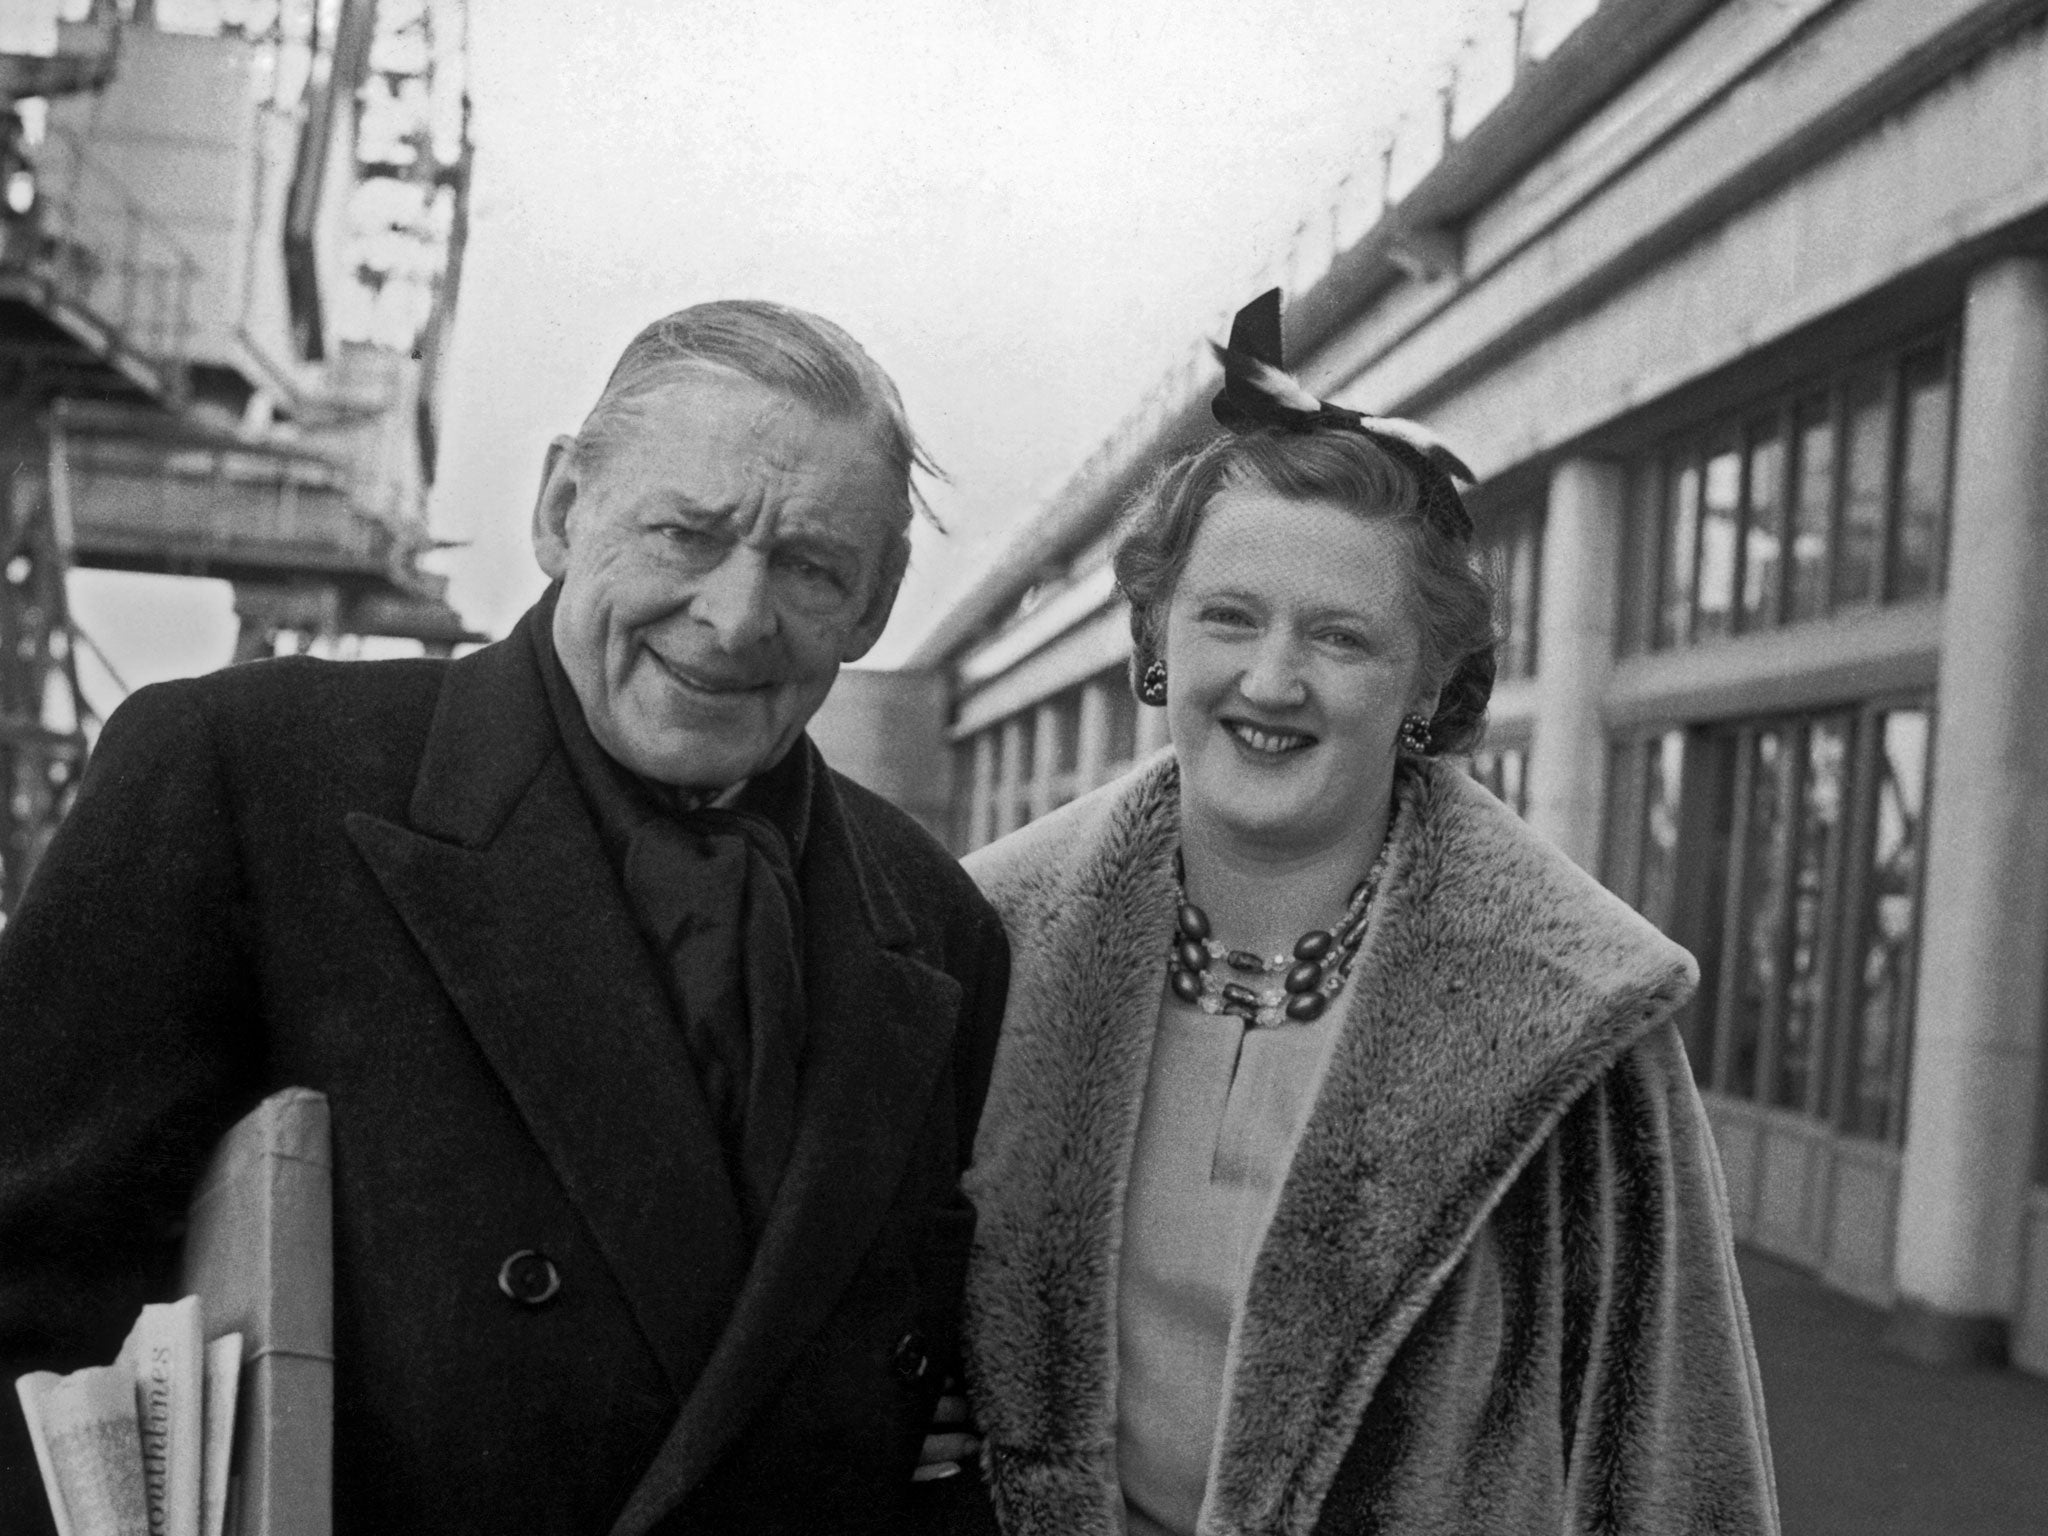 ‘Her breasts look ripe and full’: Eliot with his wife Valerie, the inspiration for his love poems